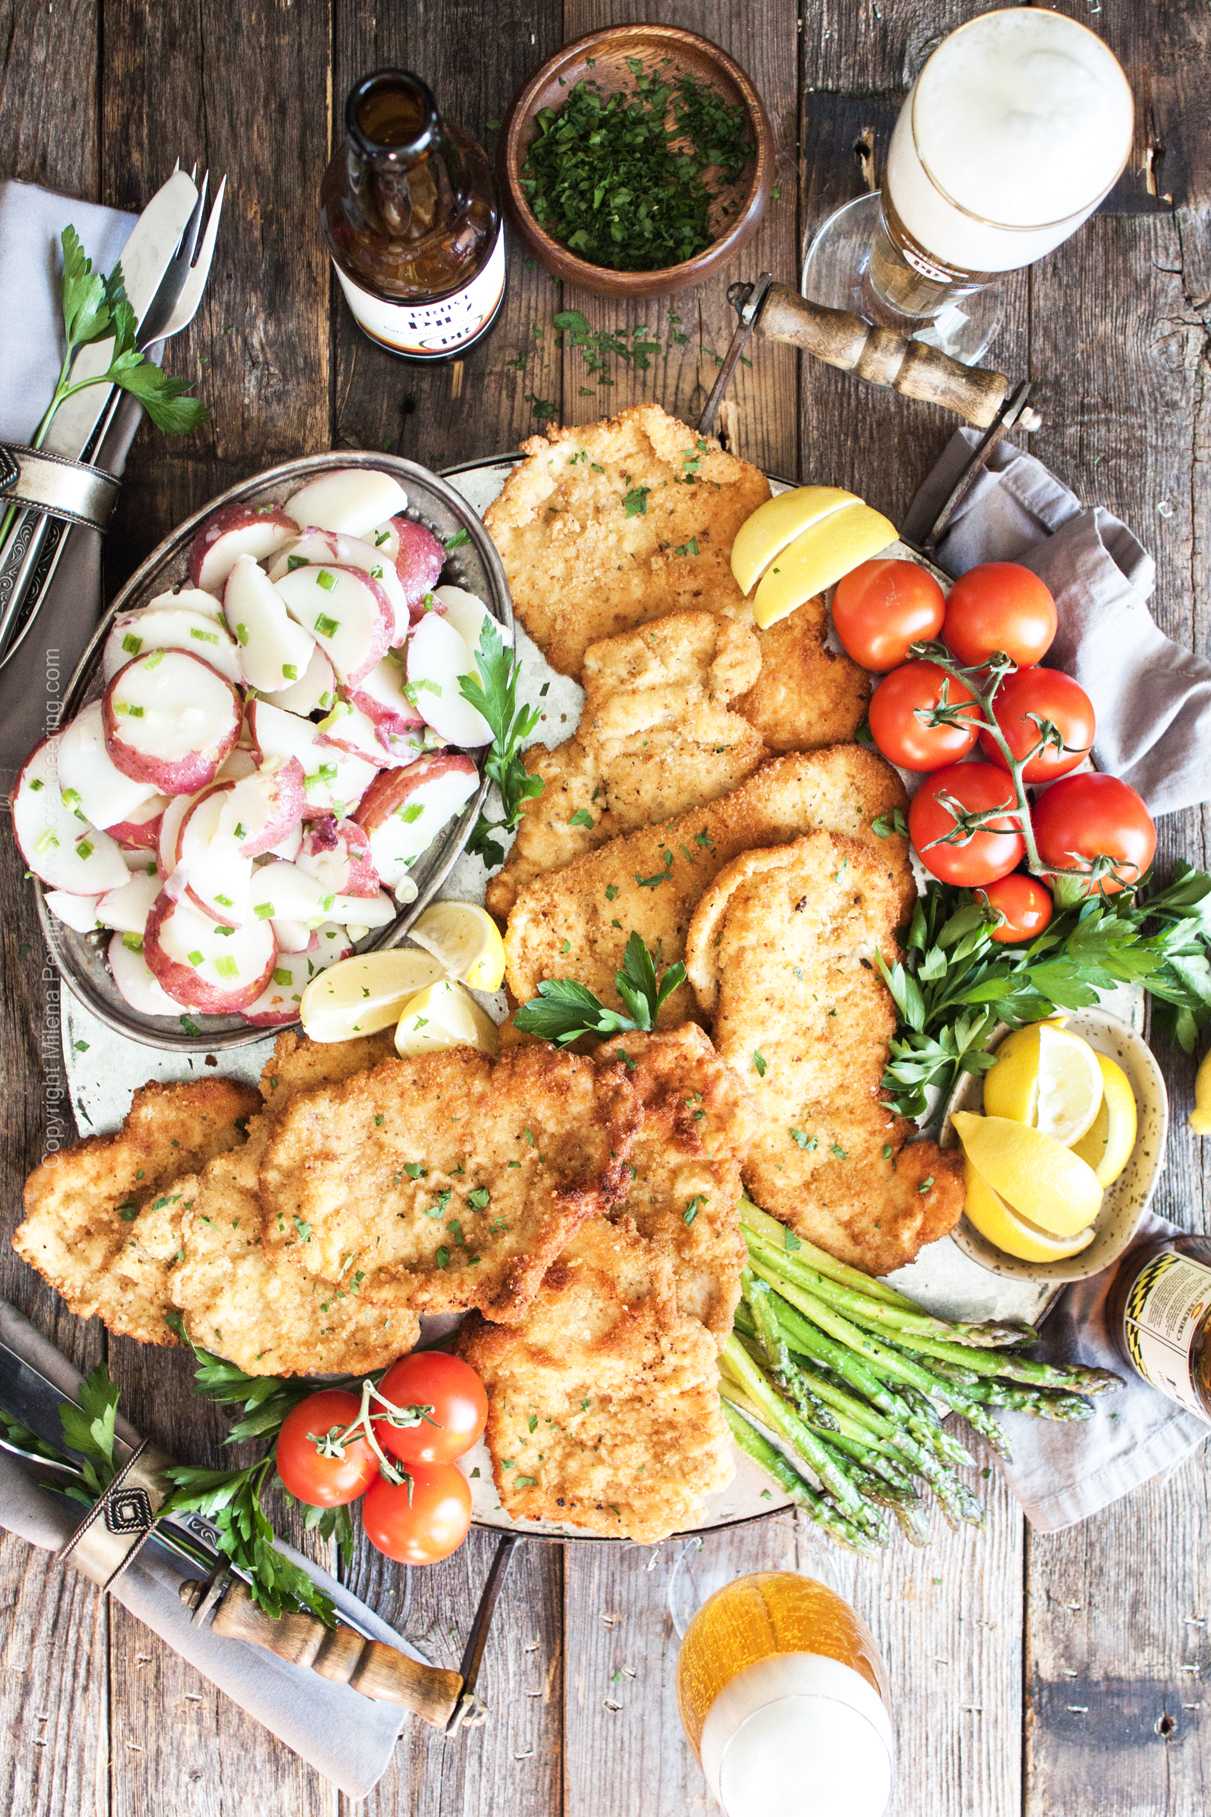 Schnitzel platter - pork and chicken with veggies and potatoes.